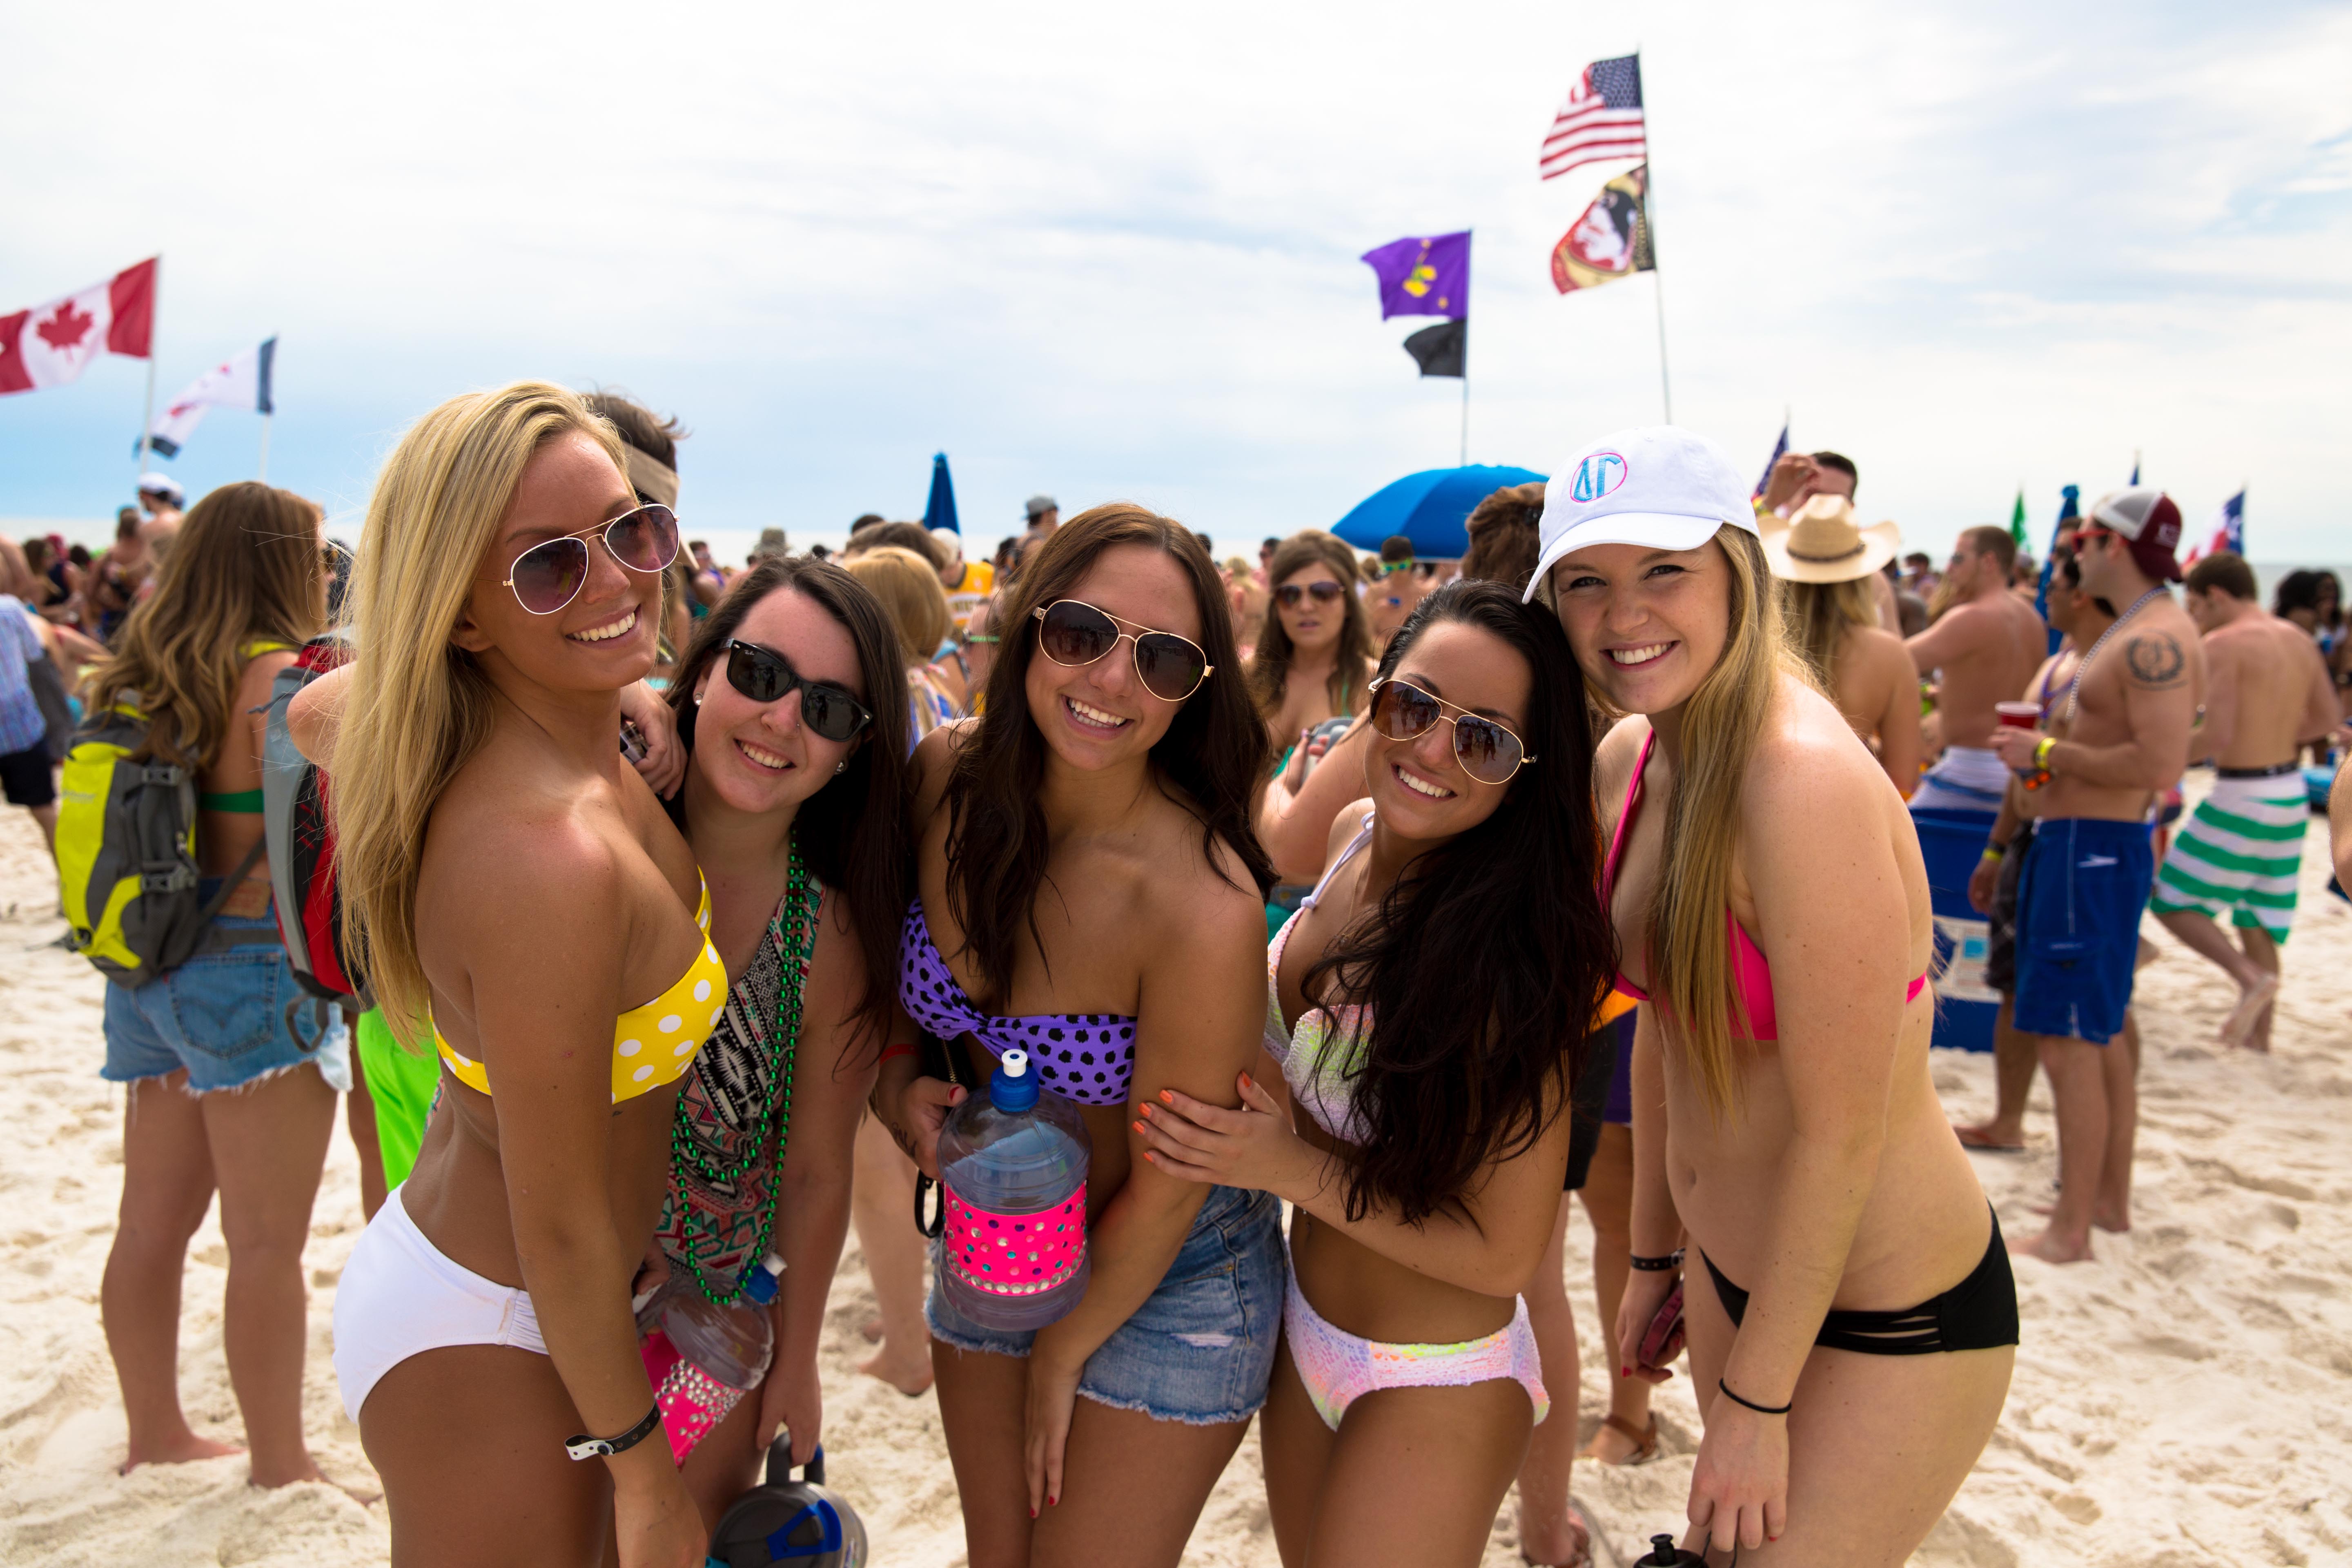 Yellowjacket recommend best of College wild beach party